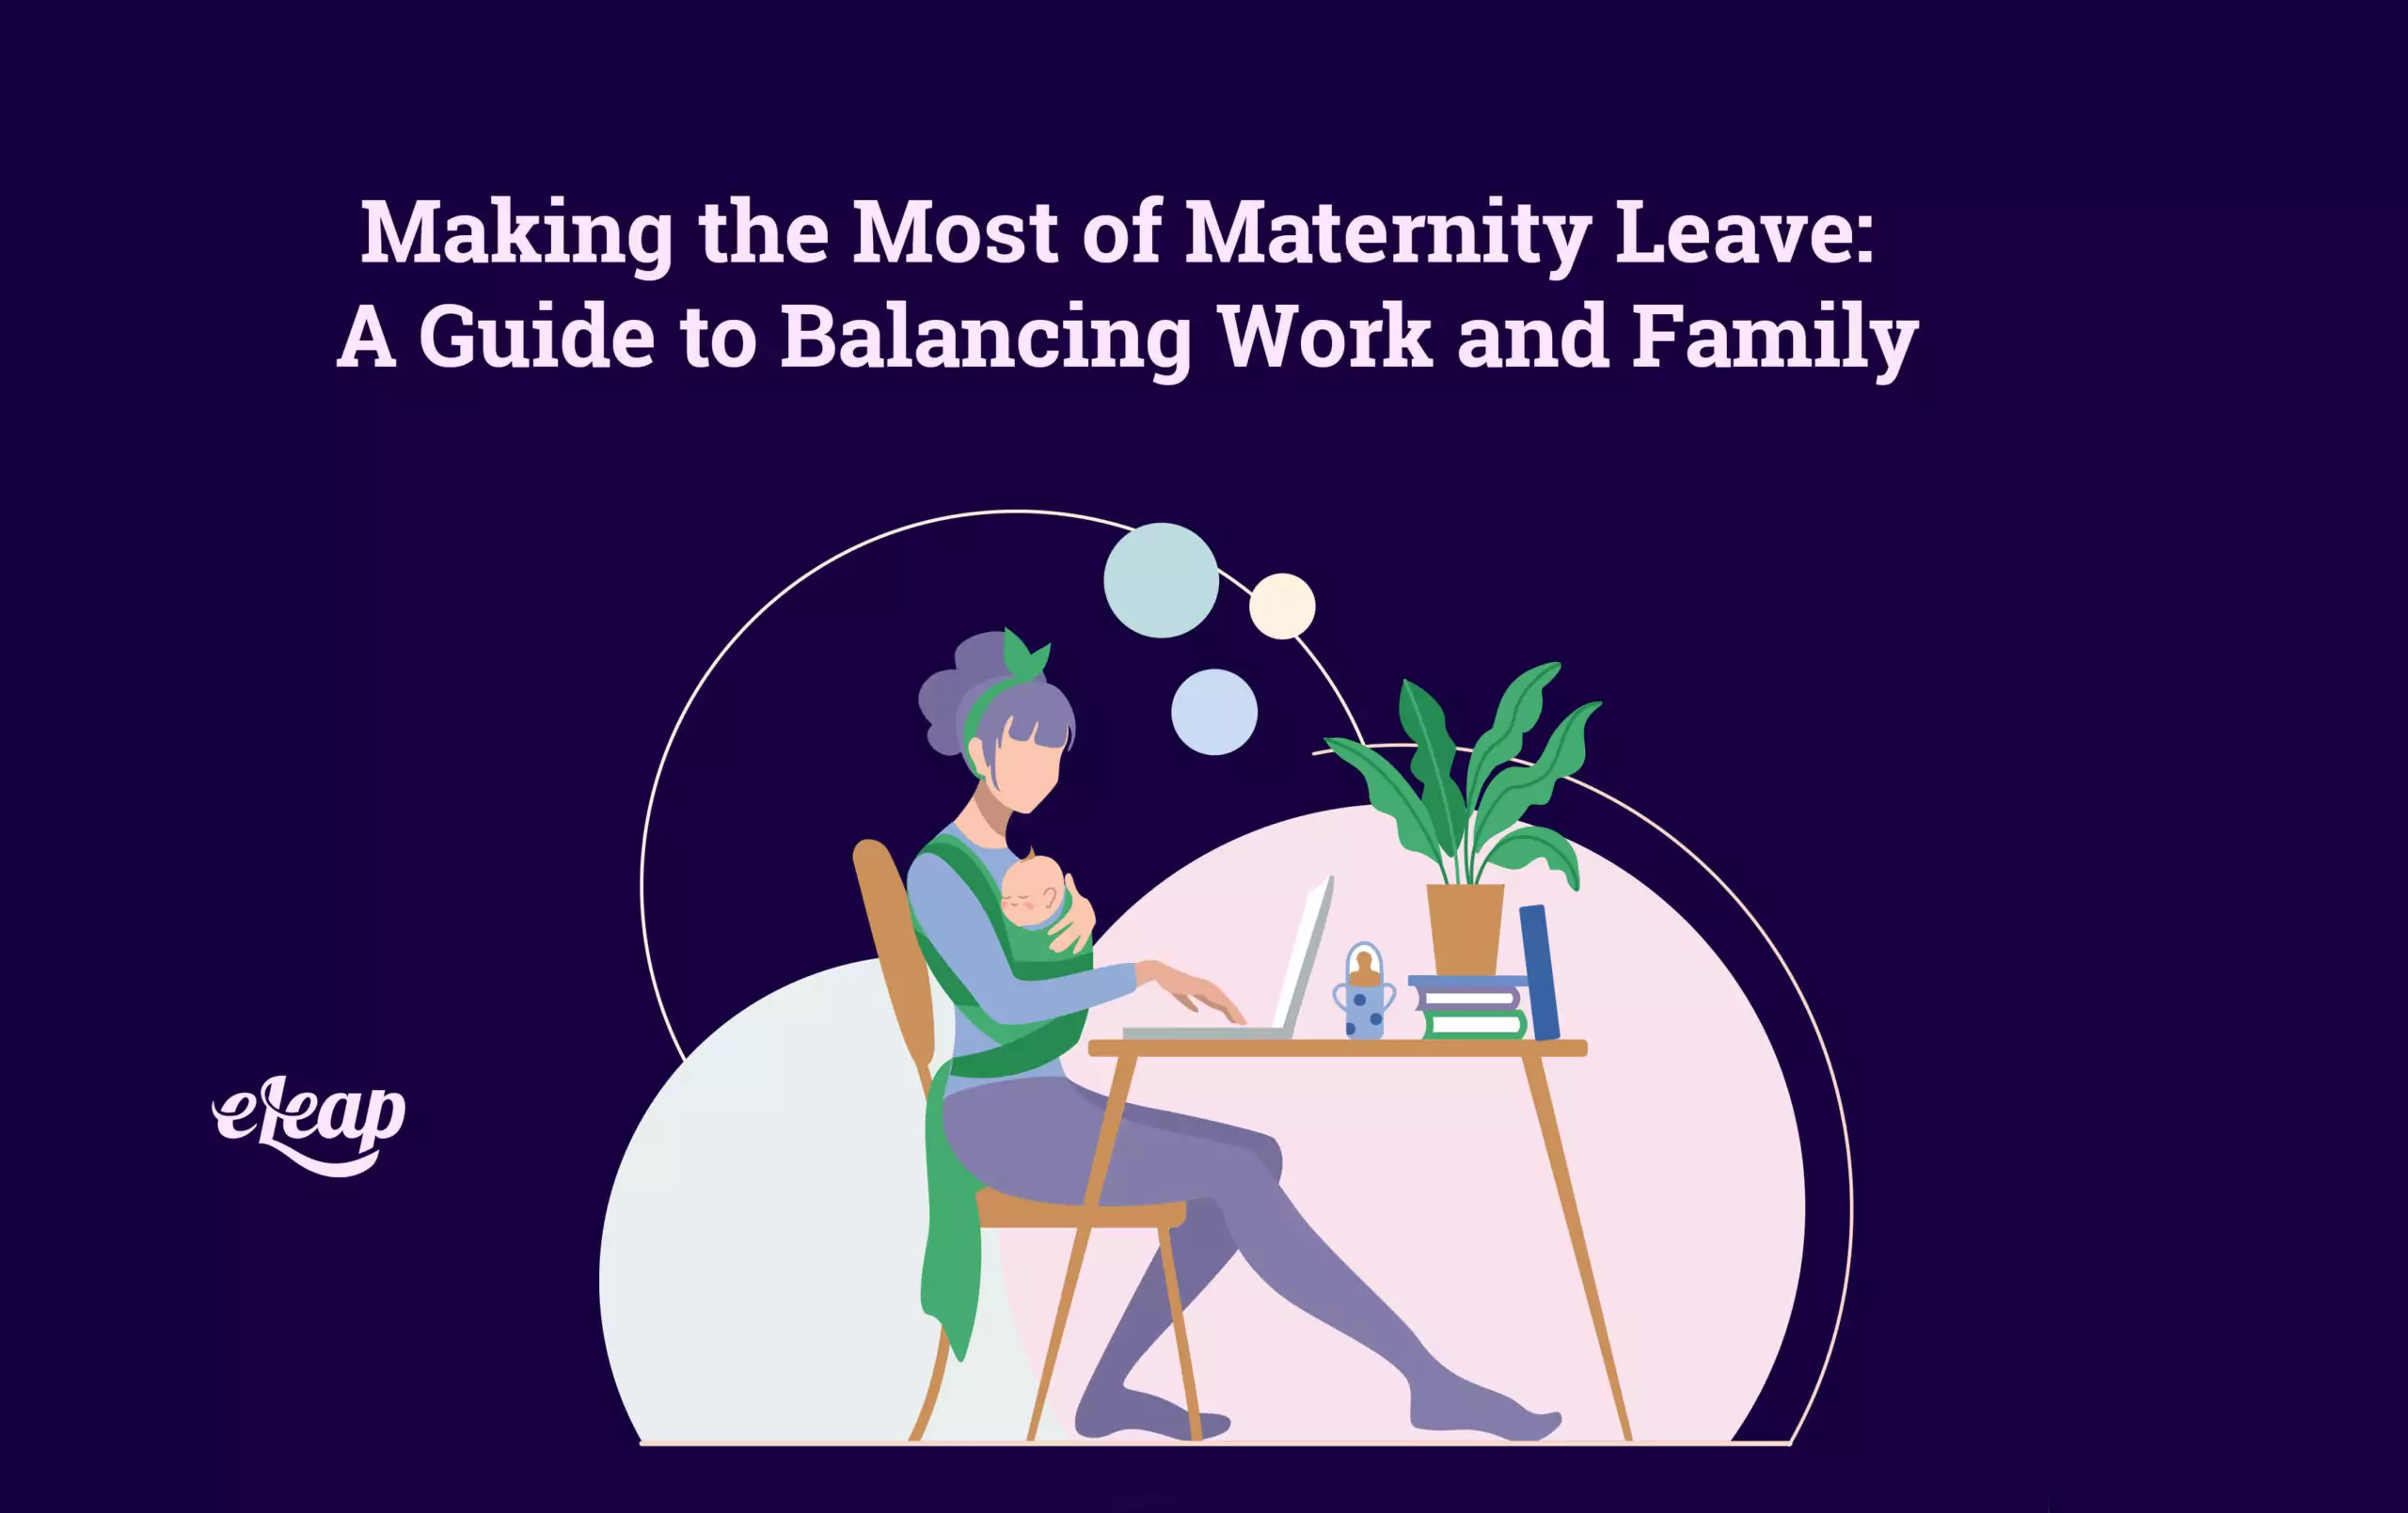 Making the Most of Maternity Leave